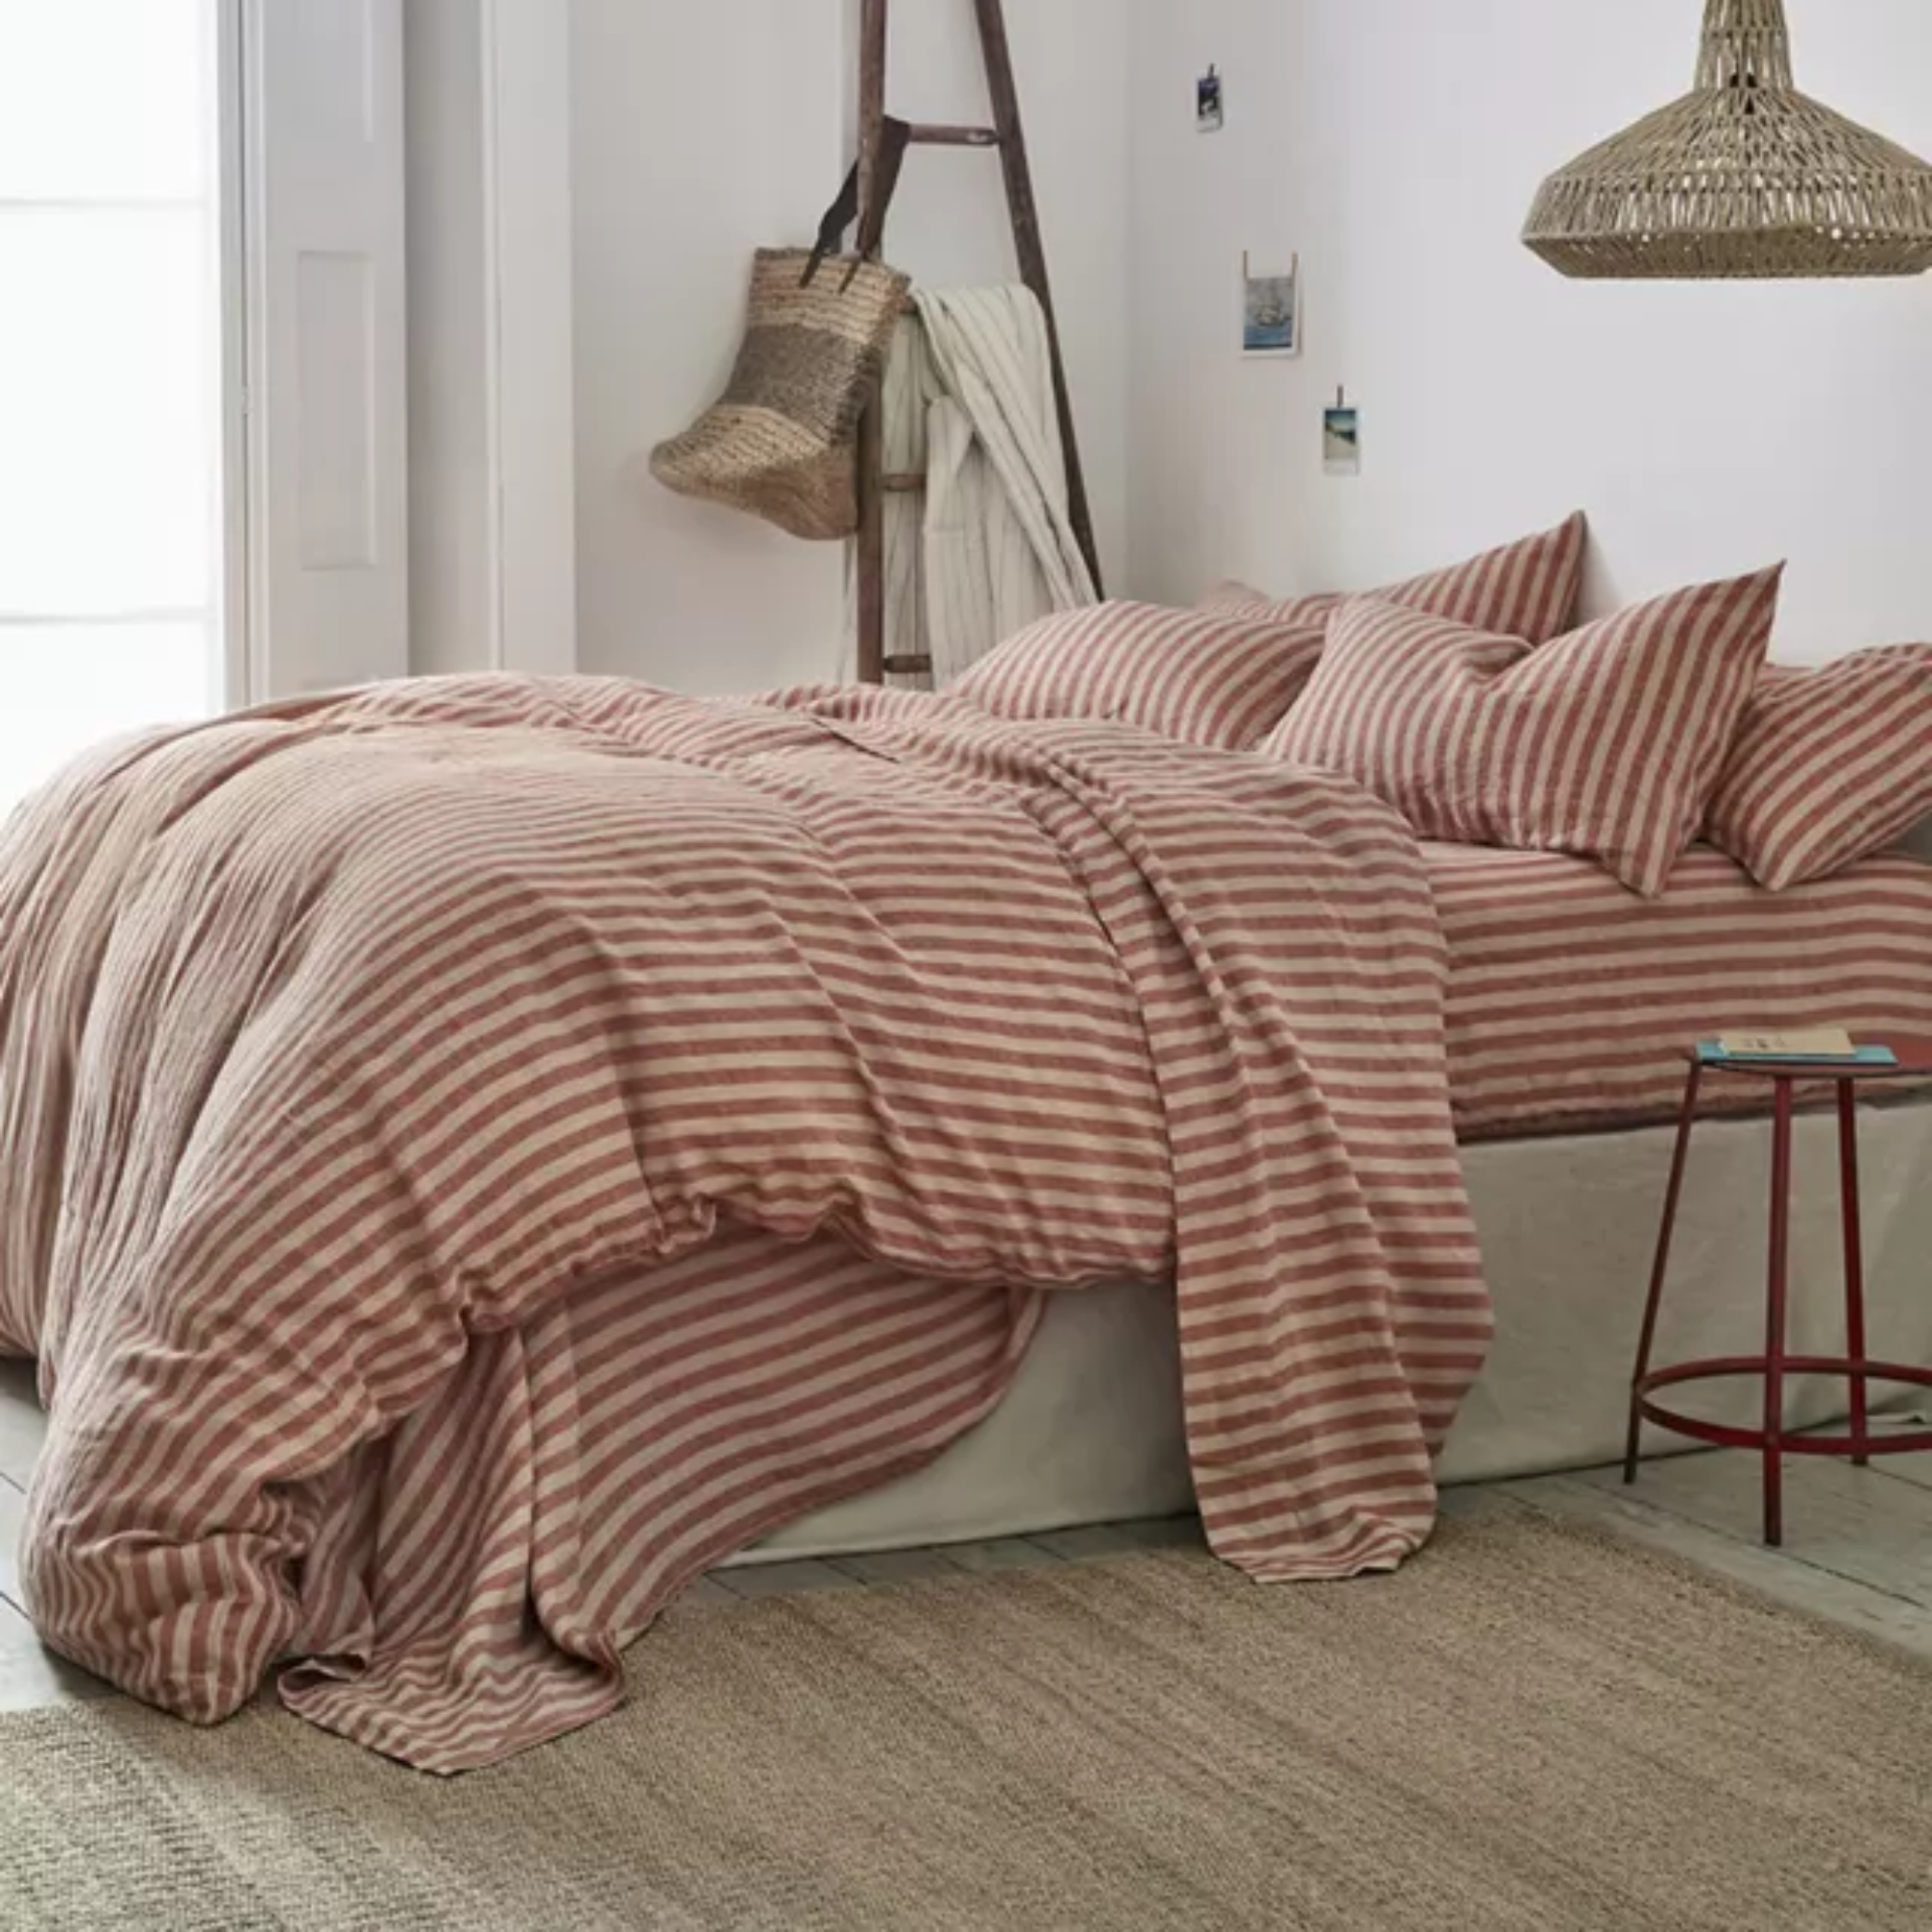 red and sand striped bedding